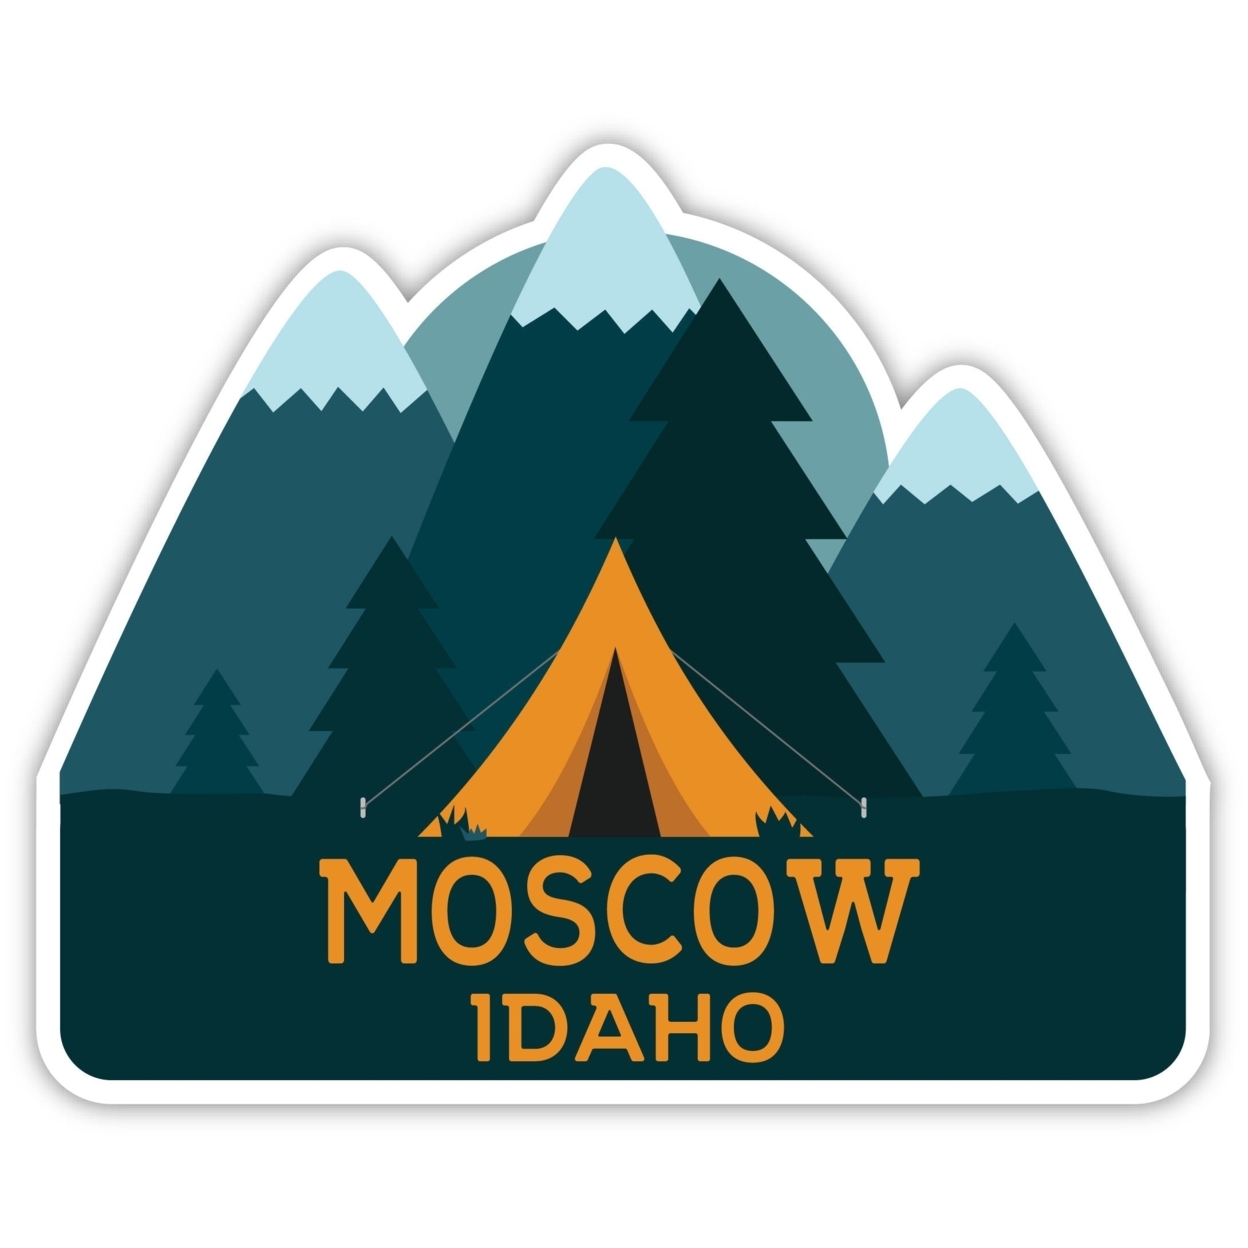 Moscow Idaho Souvenir Decorative Stickers (Choose Theme And Size) - Single Unit, 2-Inch, Tent